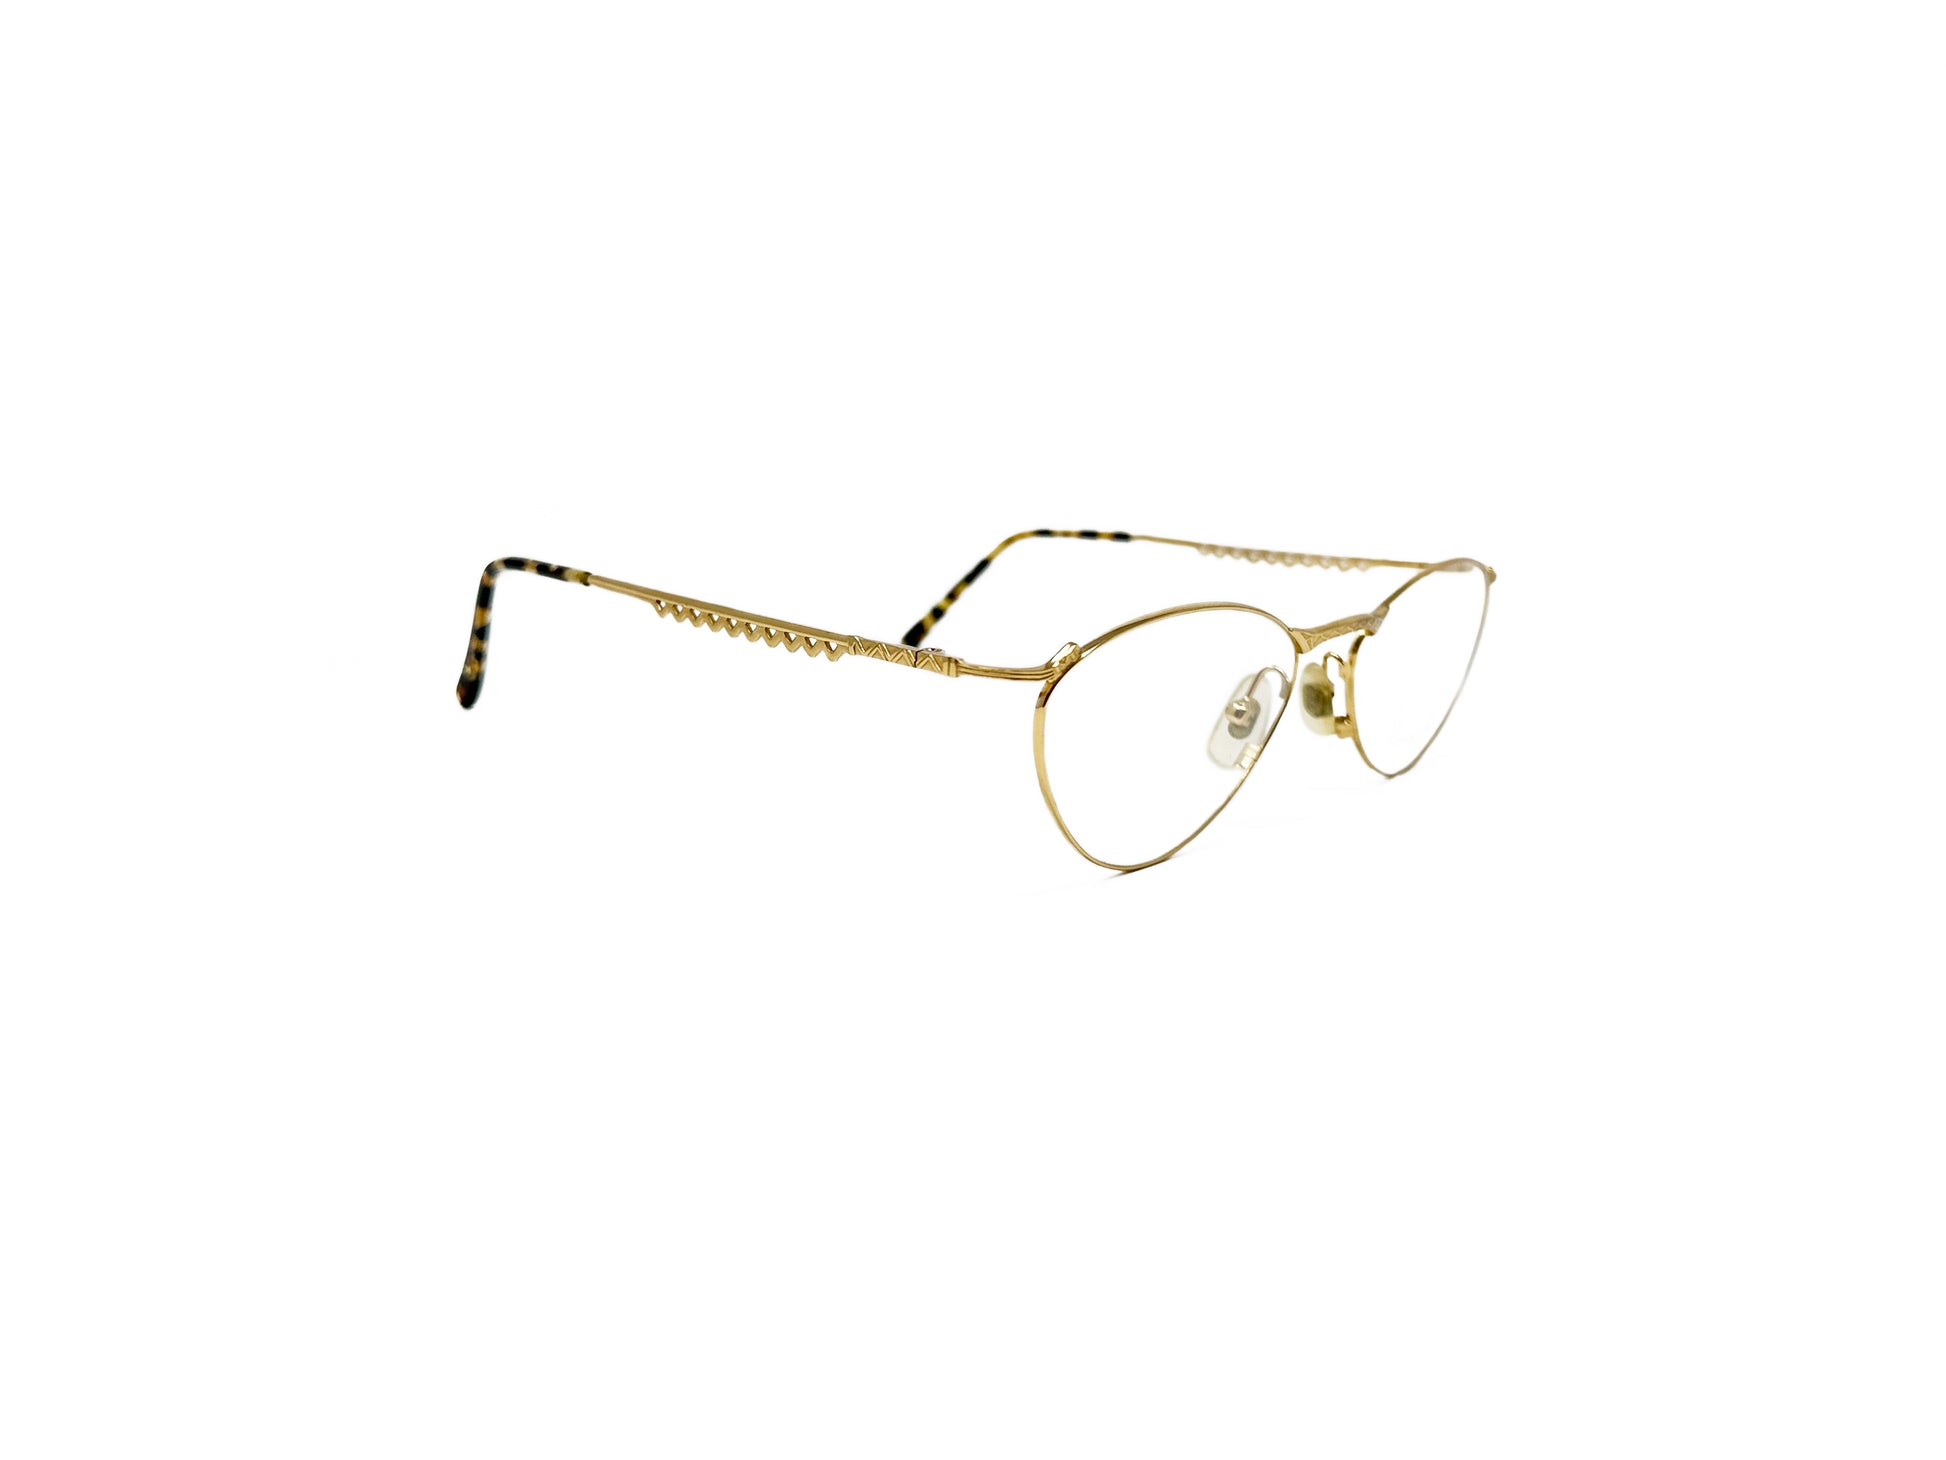 Nicole Miller oval, angular, wire optical frame. Model: Electricia. Color: Gold 0229. Side view.